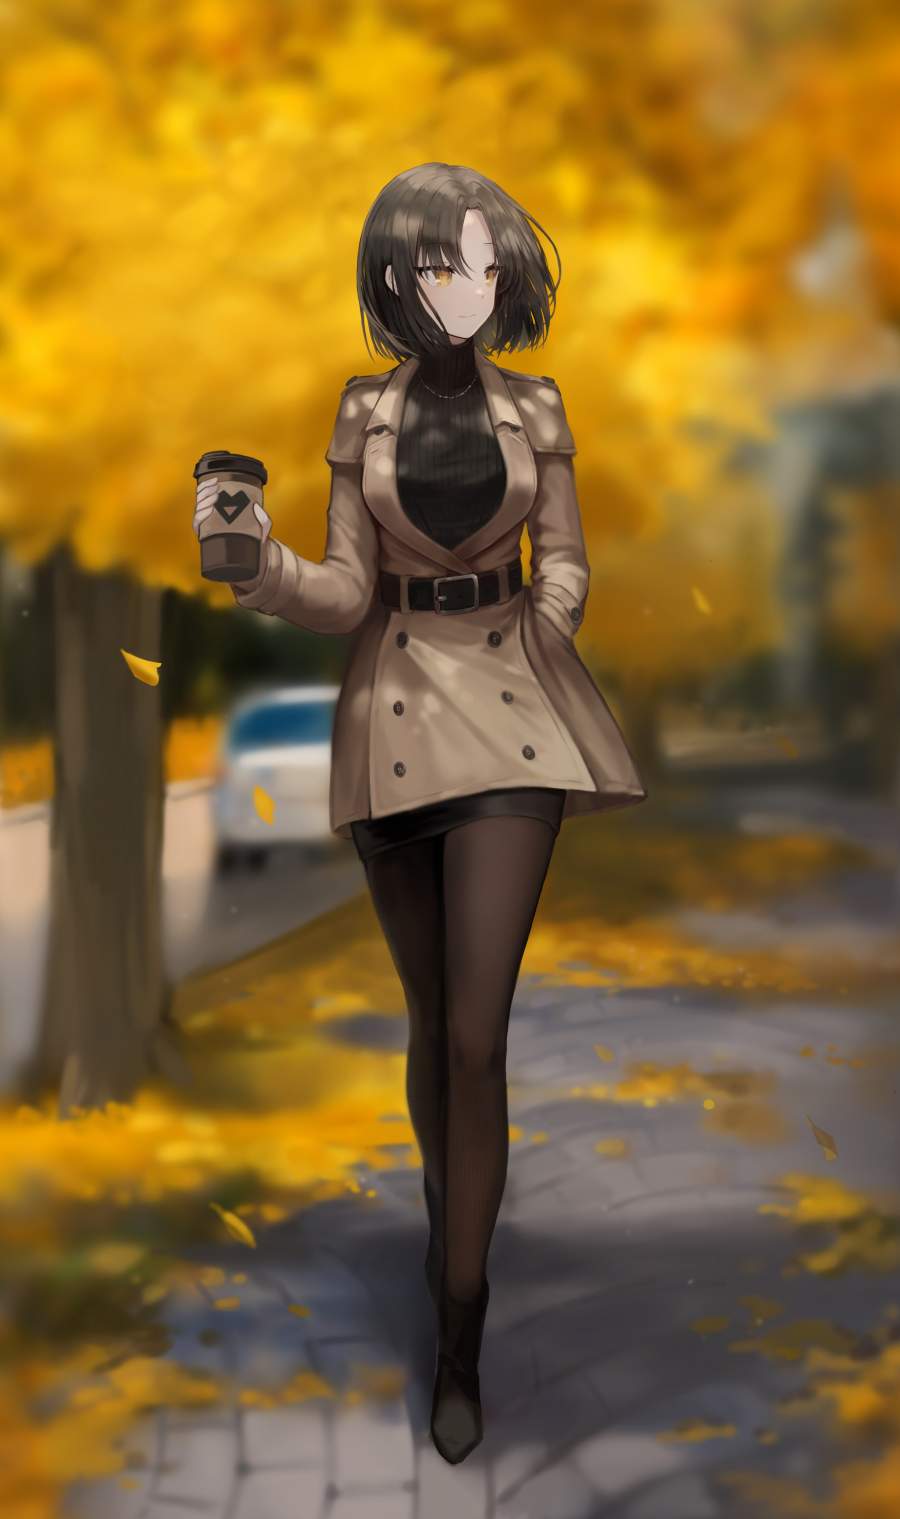 Anime Girl With Coffee IPhone Wallpaper - IPhone Wallpapers : iPhone  Wallpapers